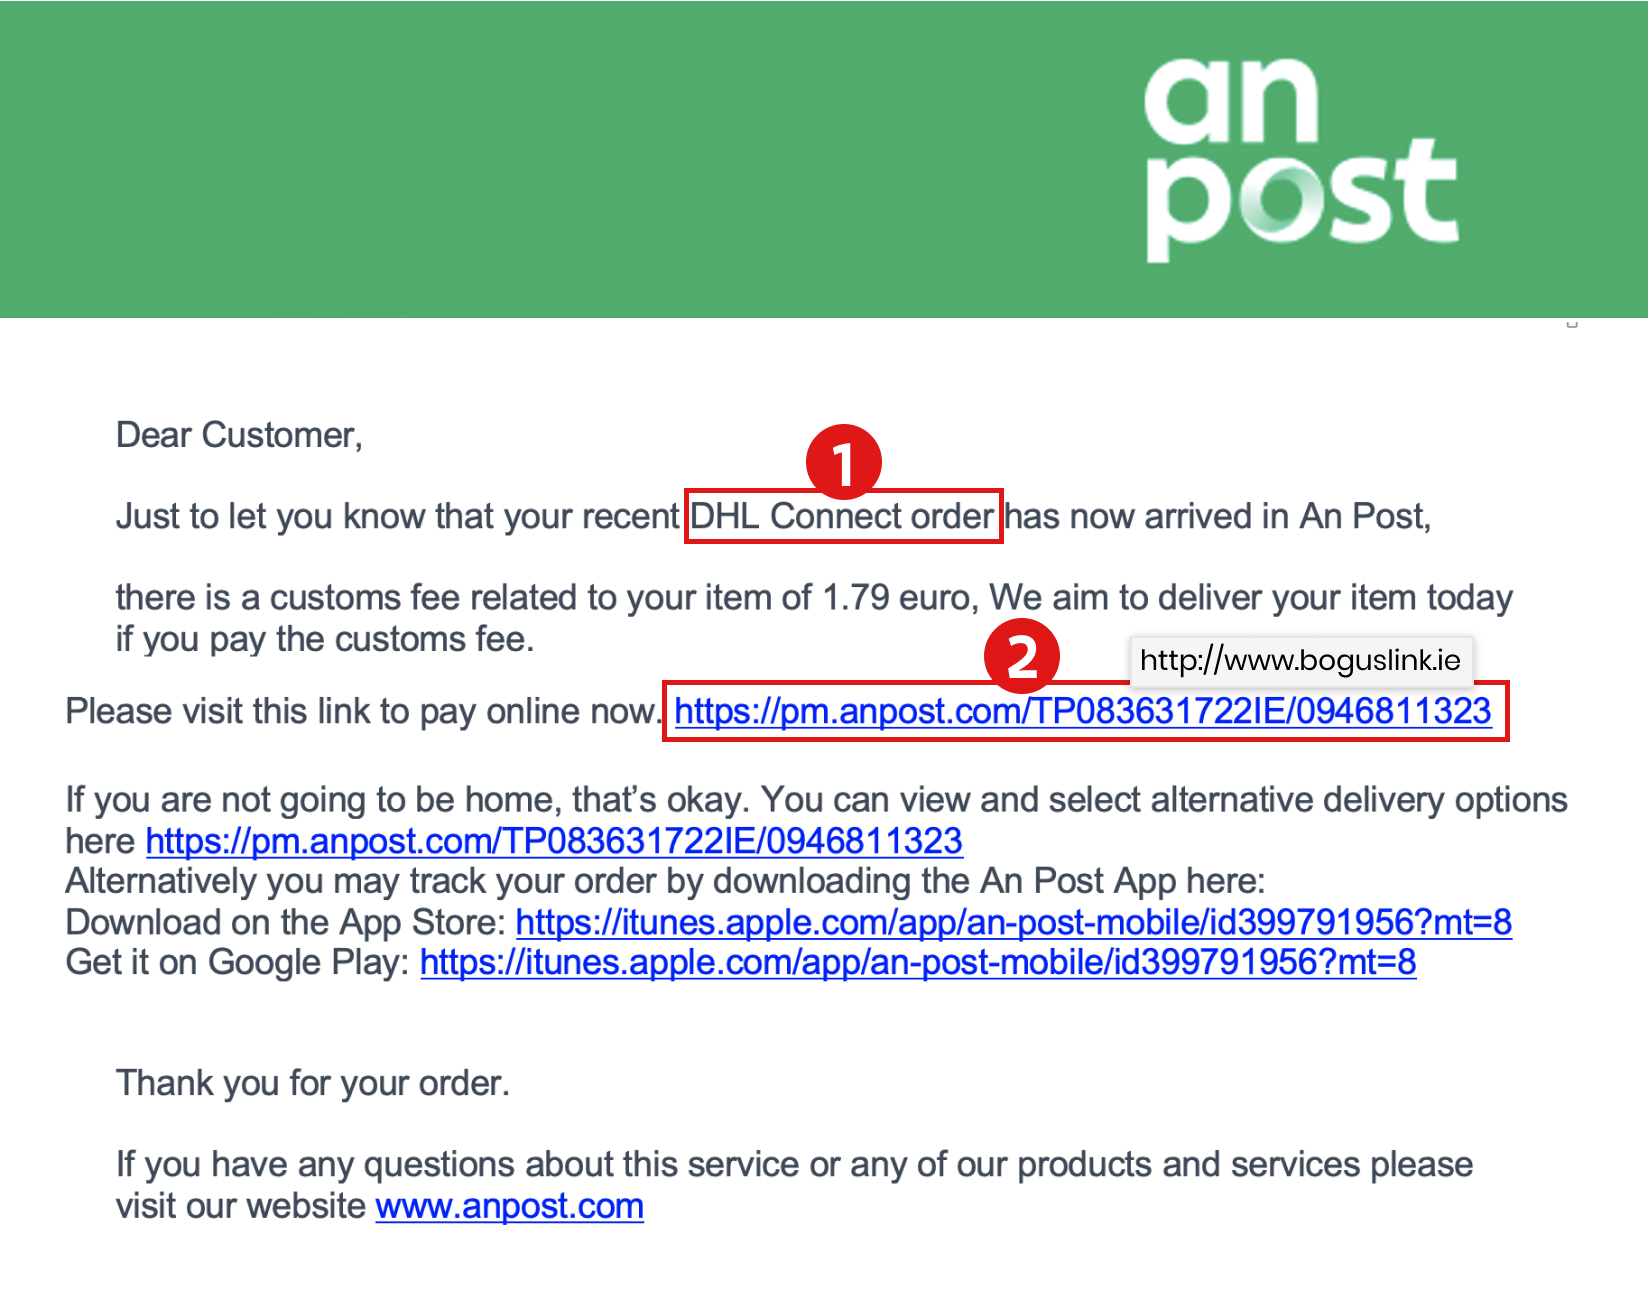 Example of email phishing